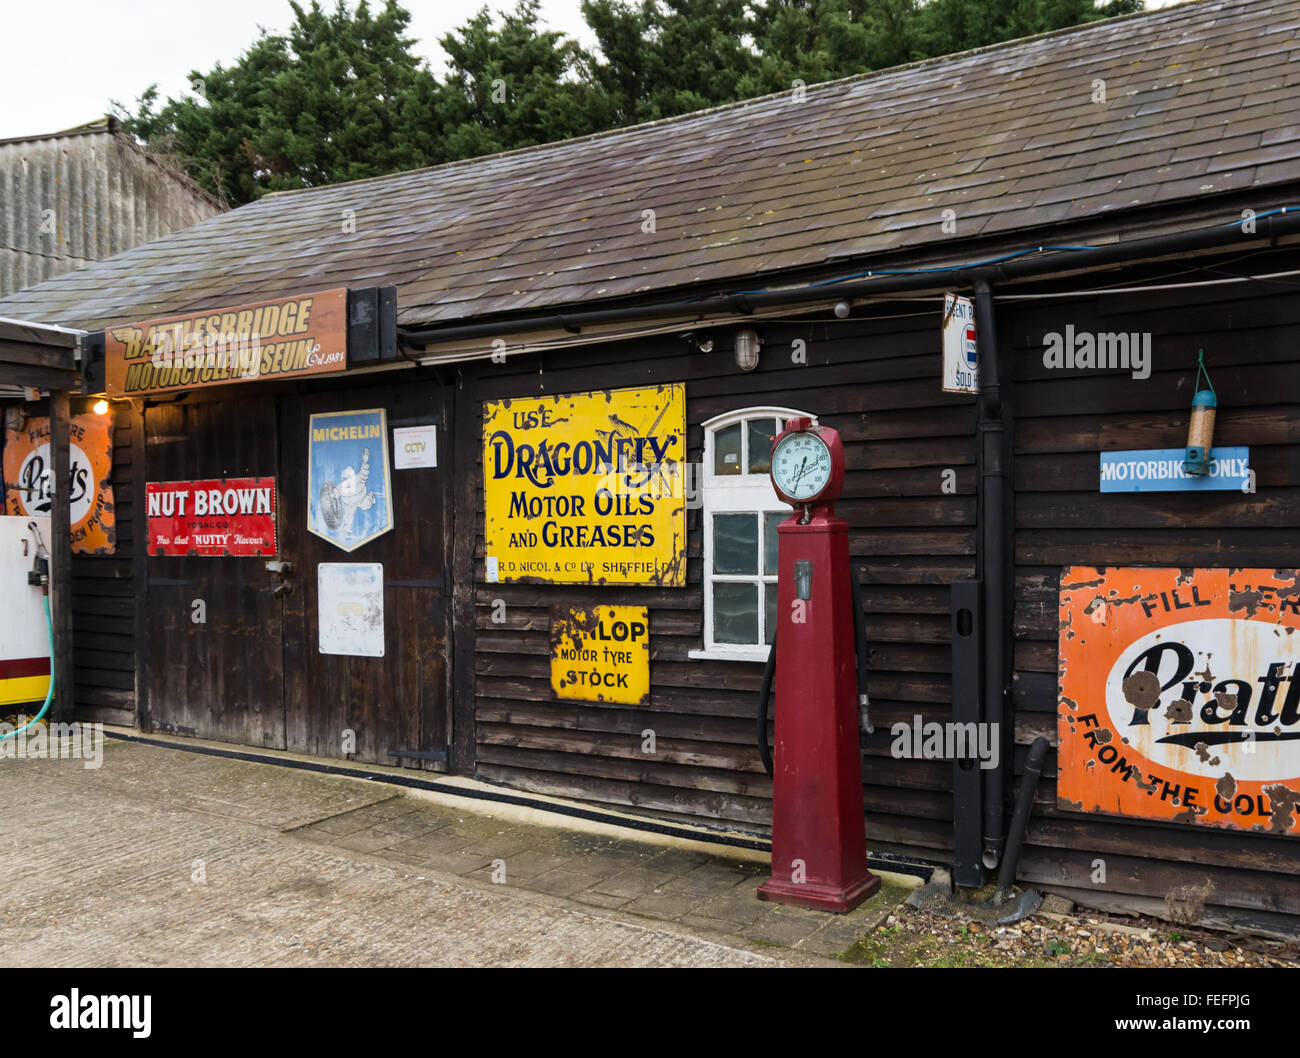 Exterior of Battlesbridge Motorcycle Museum in the Antiques Centre, which displays vintage motorbikes and memorabilia. Essex UK Stock Photo